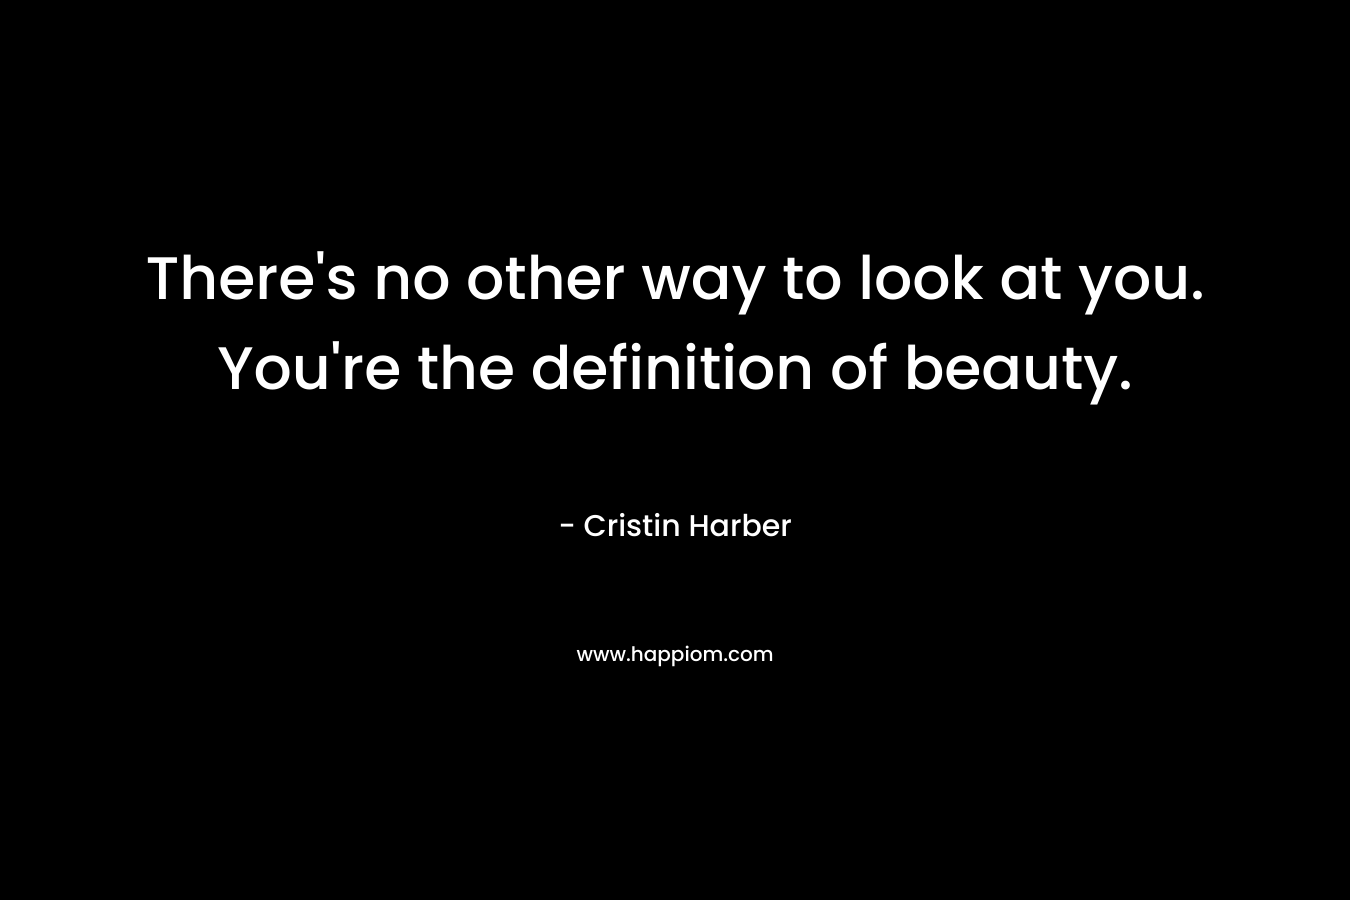 There's no other way to look at you. You're the definition of beauty.